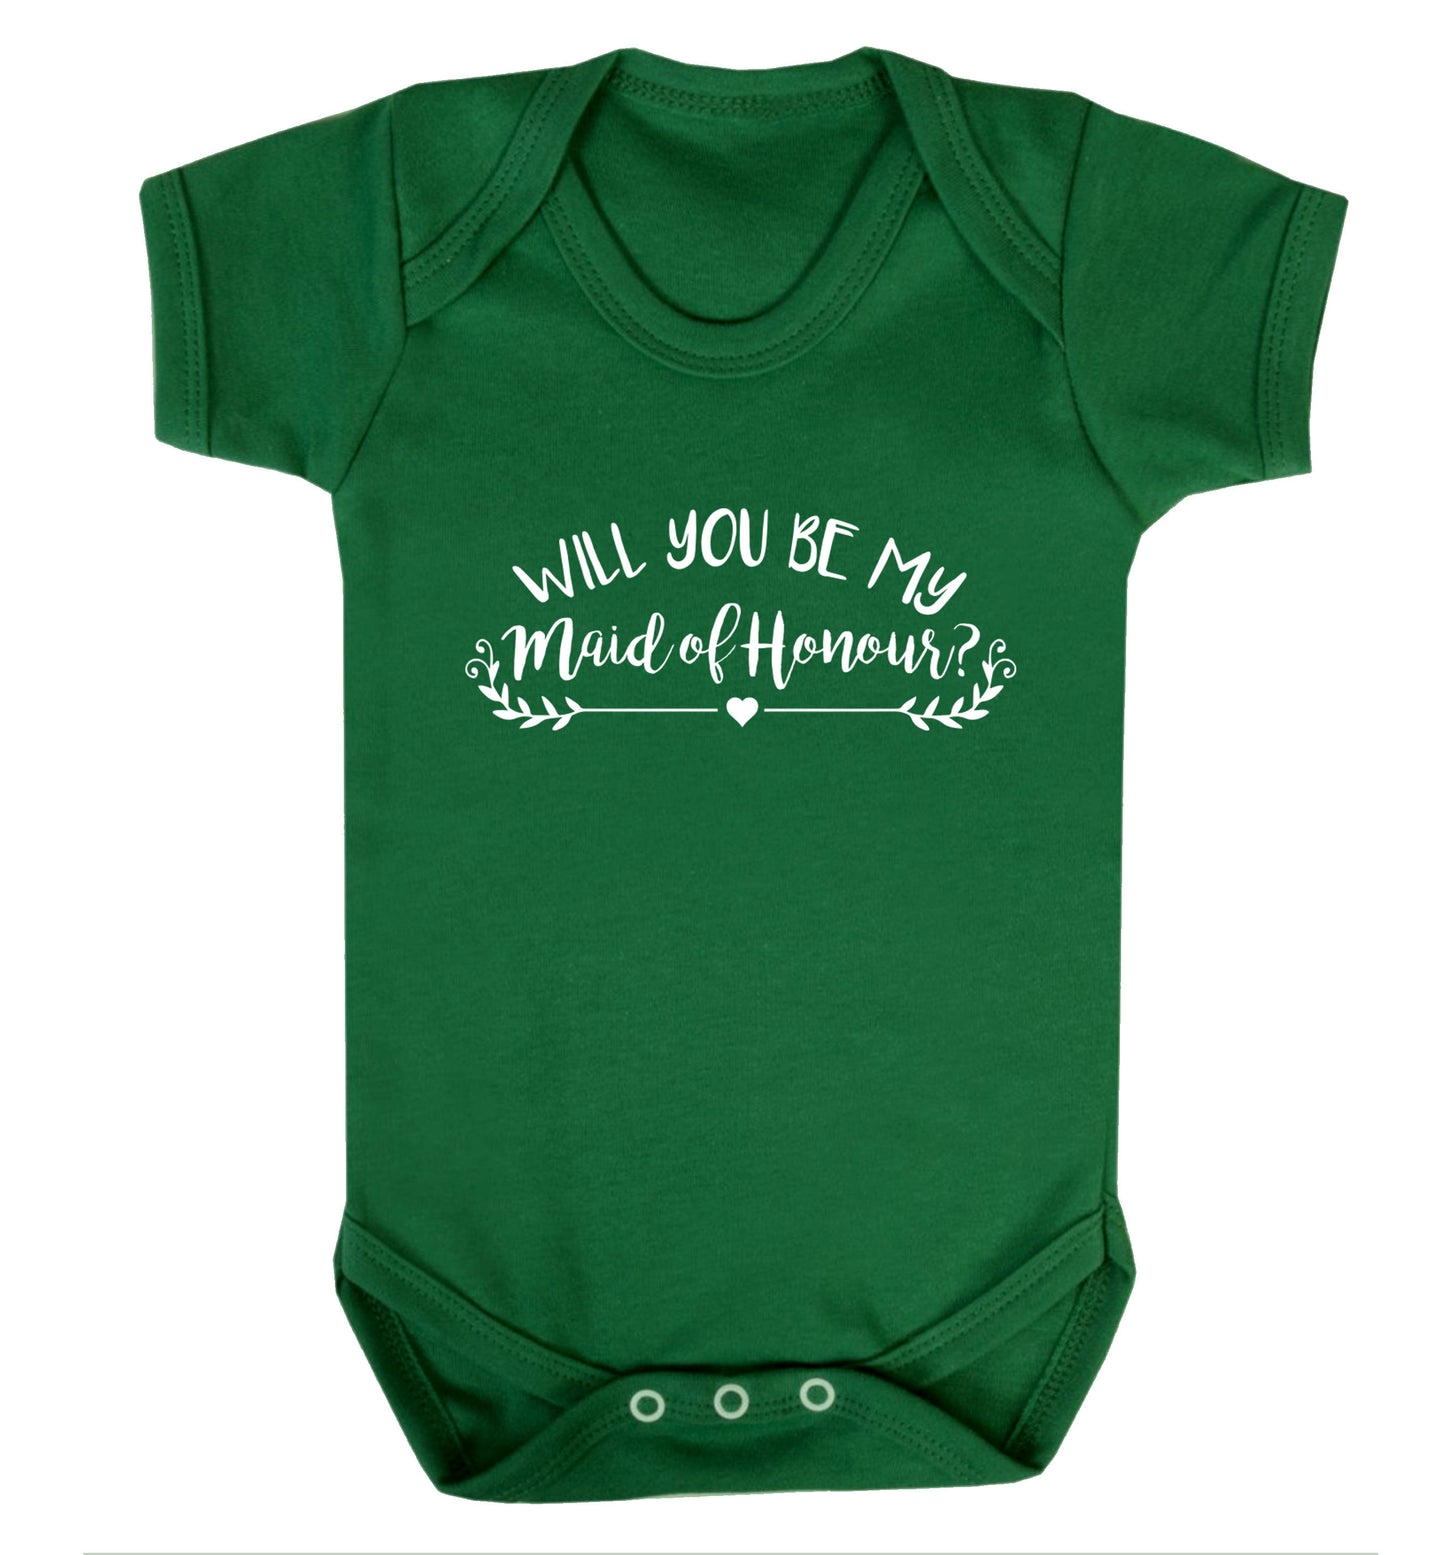 Will you be my maid of honour? Baby Vest green 18-24 months